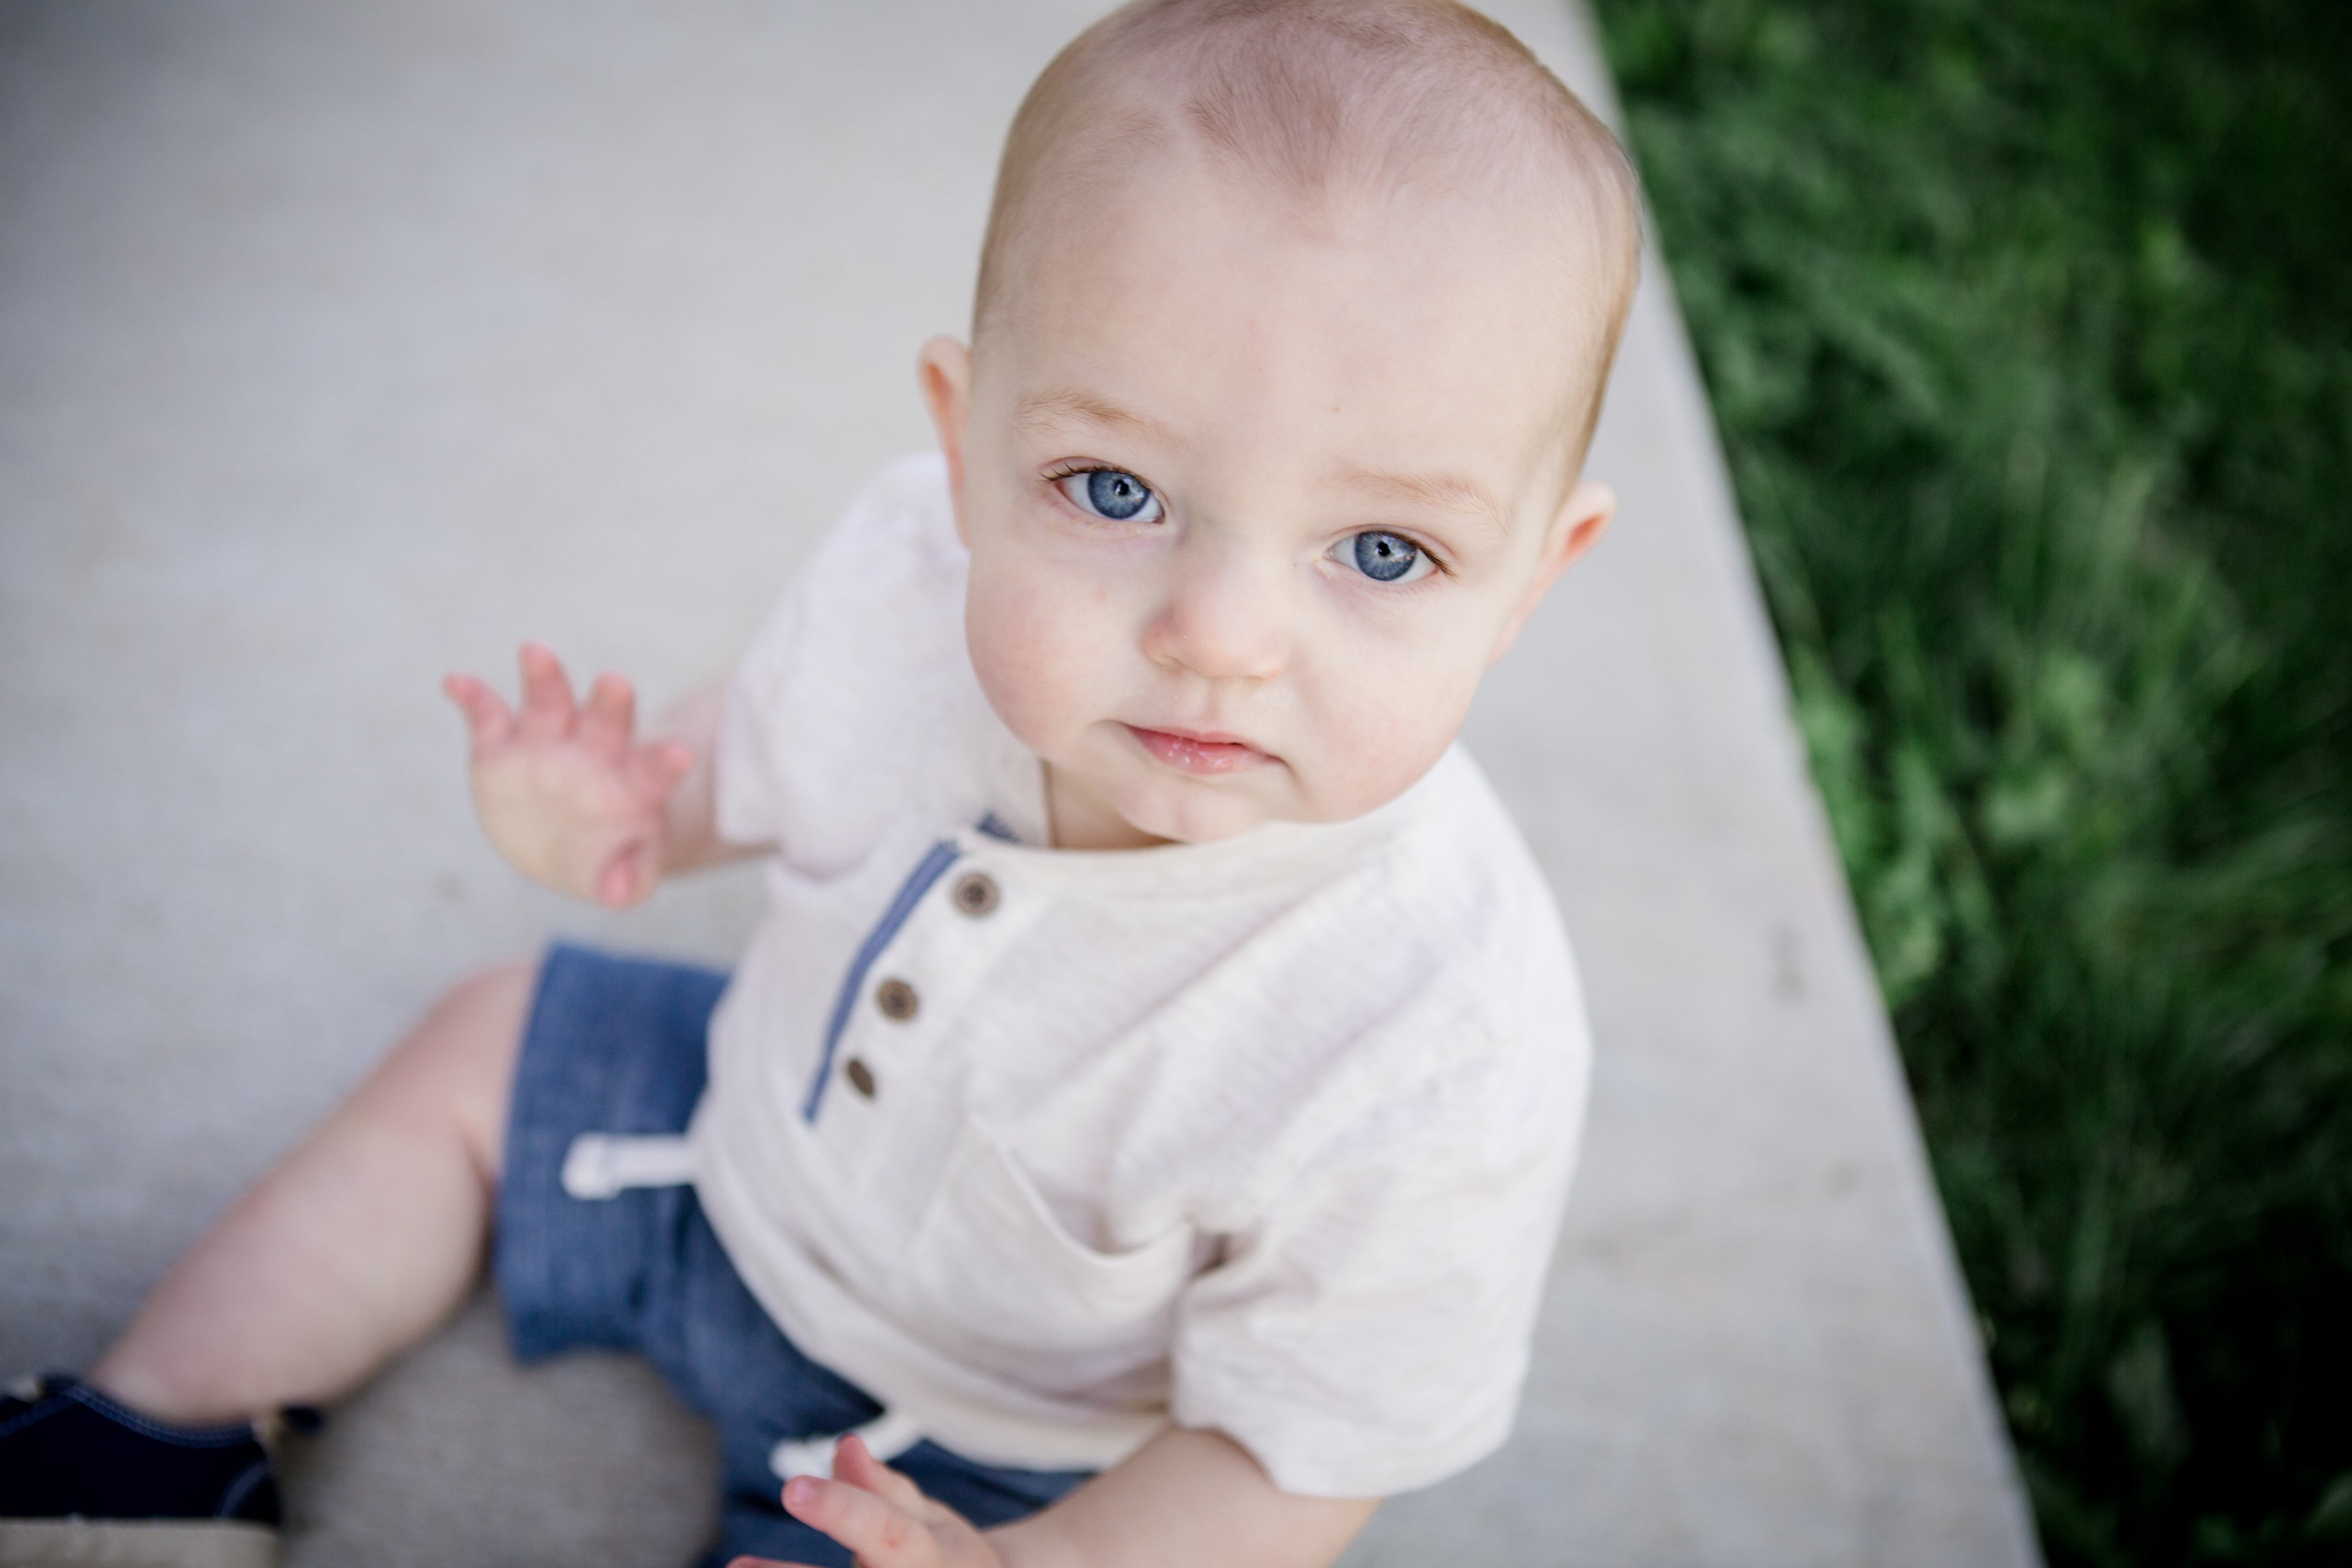 Little boy looking up by Knoxville Wedding Photographer, Amanda May Photos.